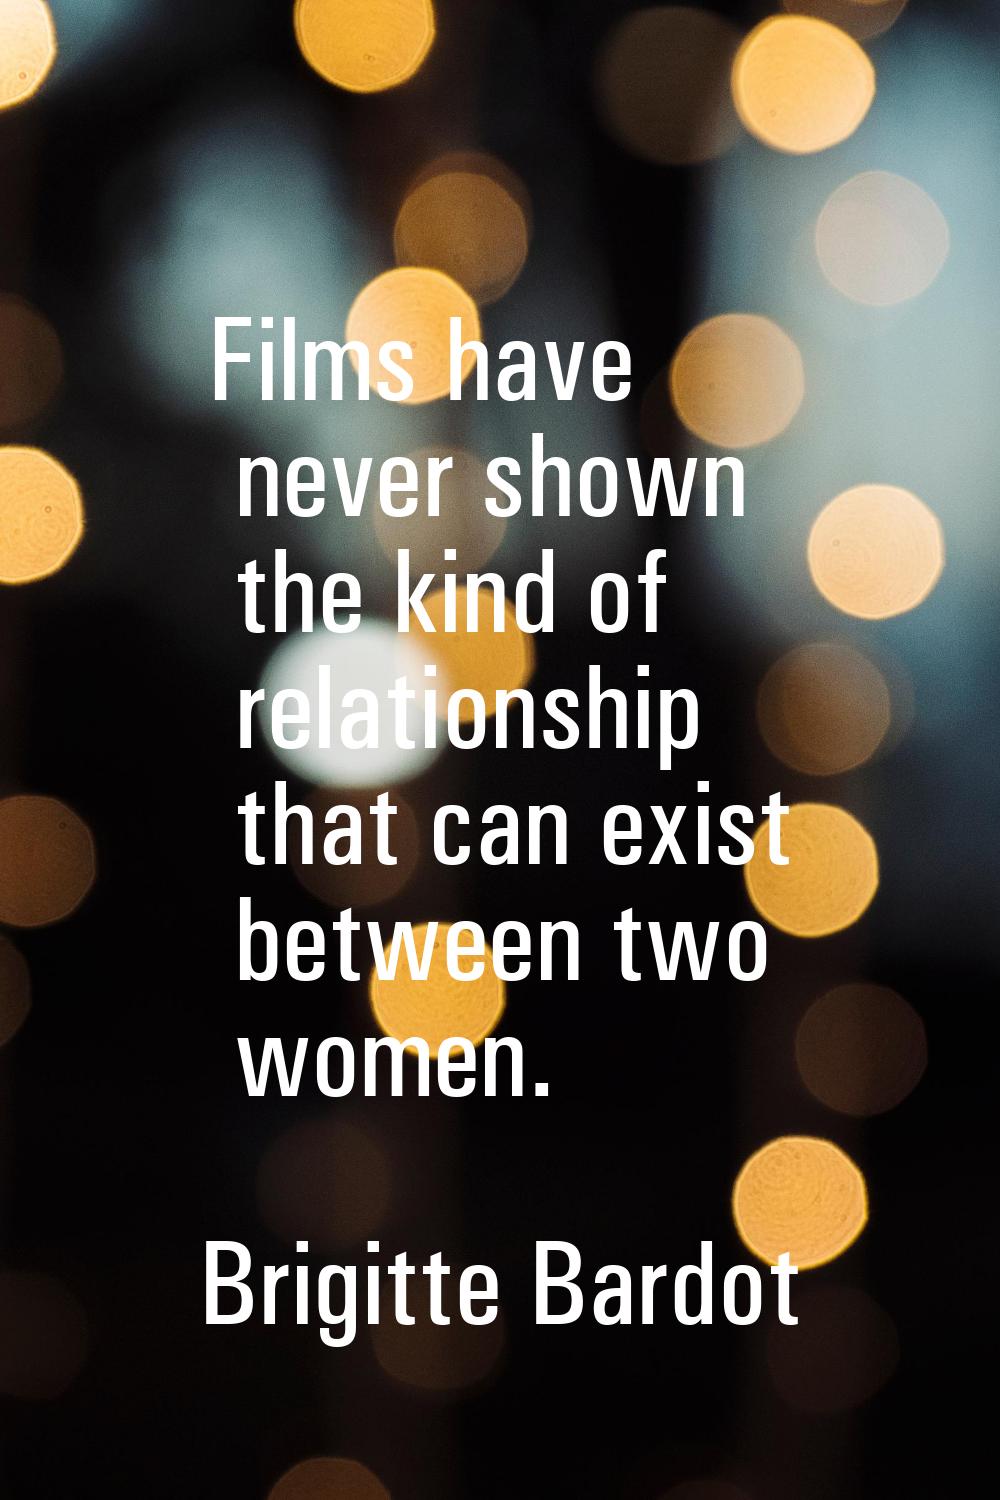 Films have never shown the kind of relationship that can exist between two women.